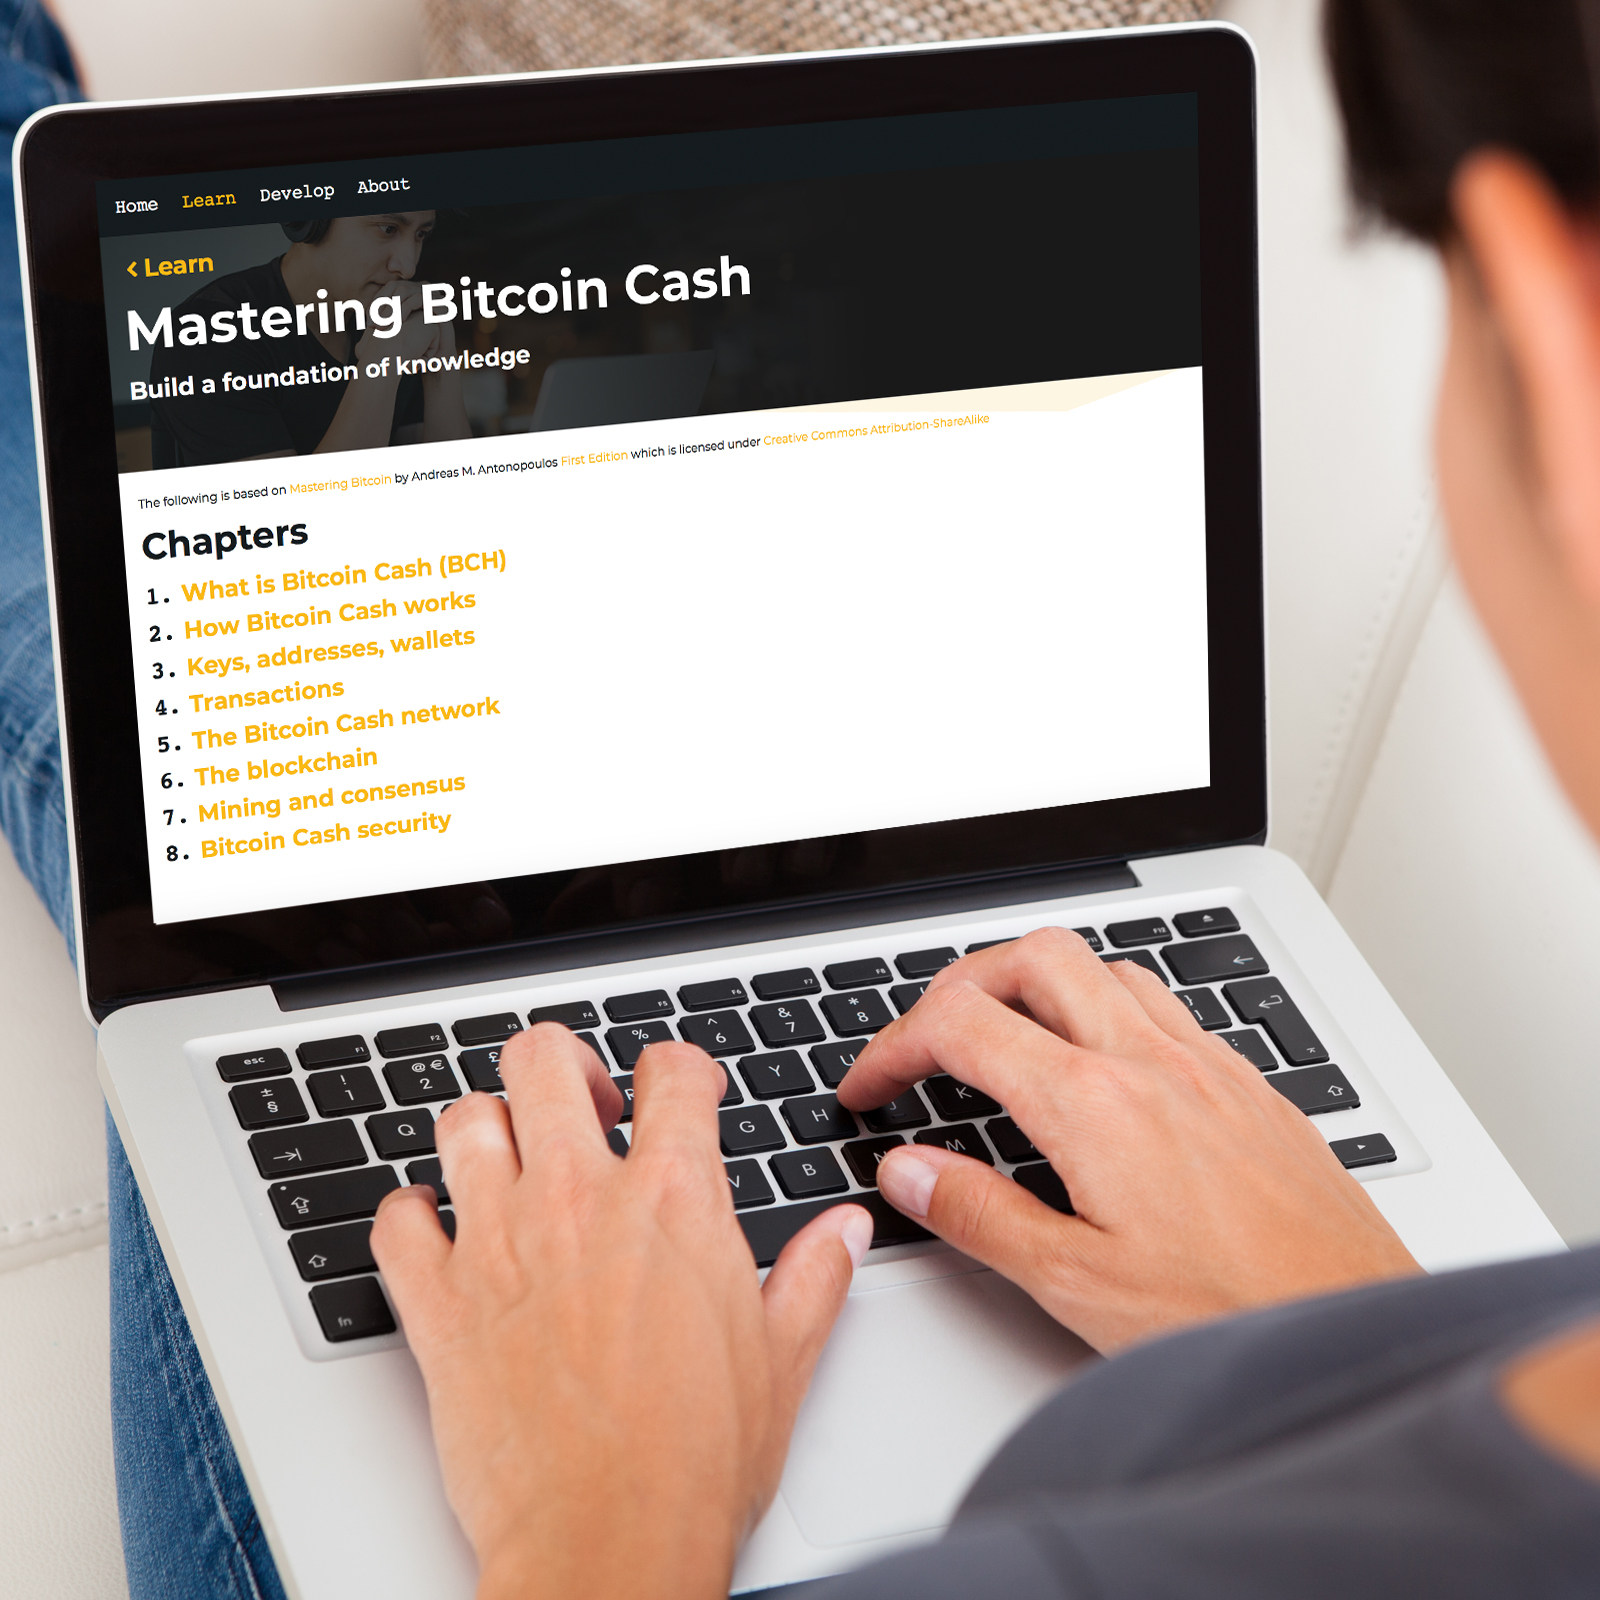 Learn About the BCH Network With Bitcoin.com's 'Mastering Bitcoin Cash'